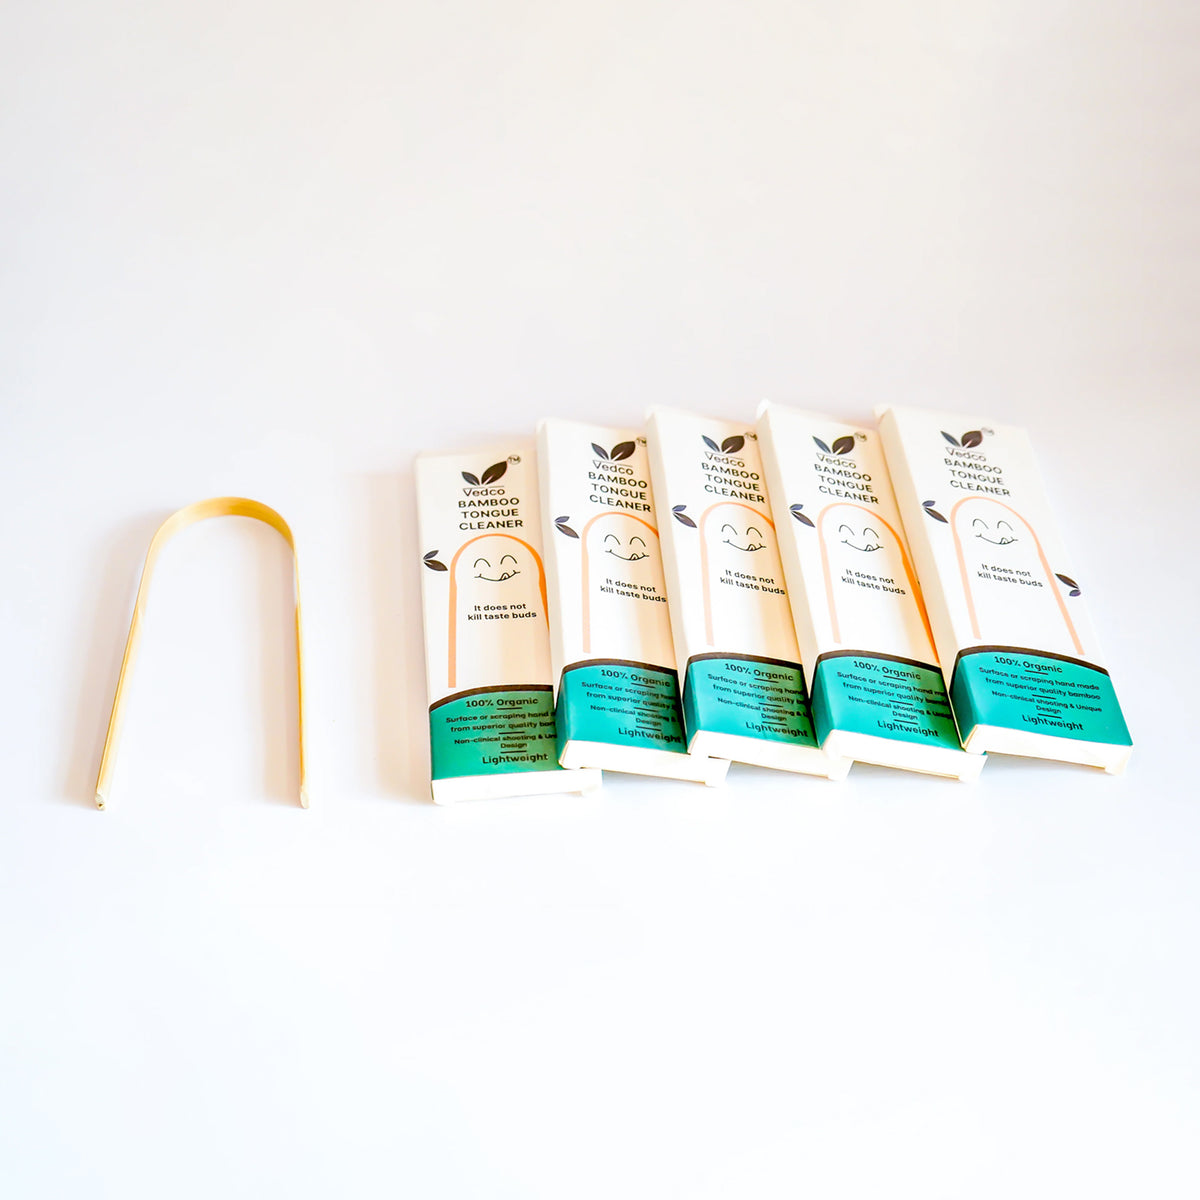 Vedco Bamboo Harmony Tongue Cleaner | Set of 5